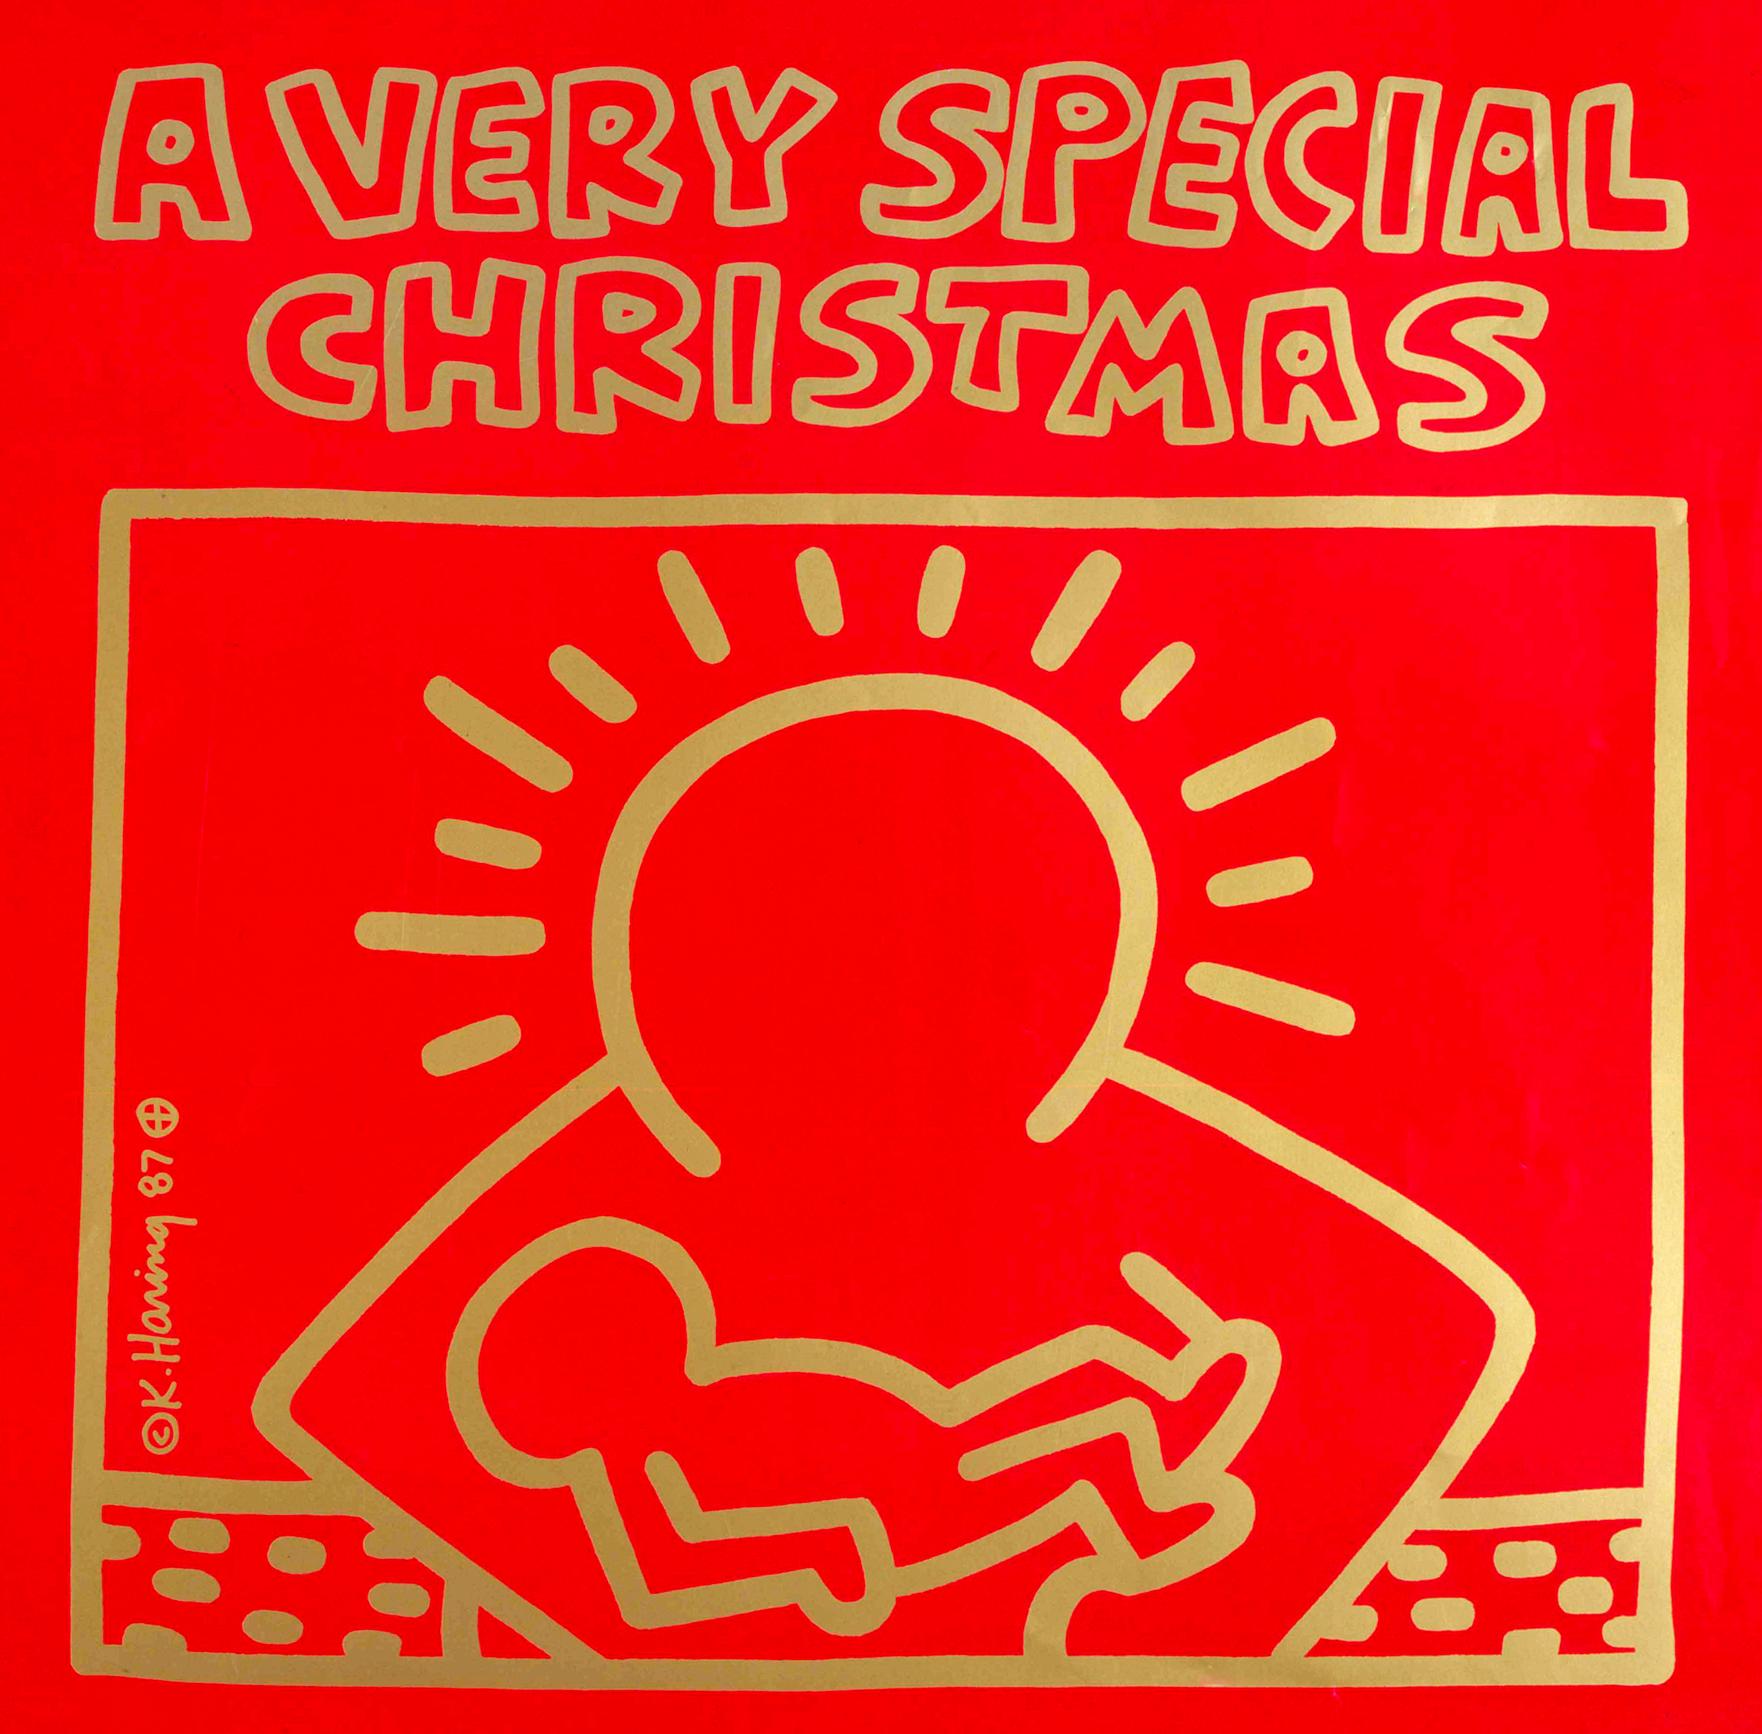 Vintage Keith Haring Record Cover Art, 1982-1987. Set of 4 individual pieces including their respective albums.

Haring illustrations appear on front and back covers, plus illustrated inserts/booklets on two of the albums (see images 4 &